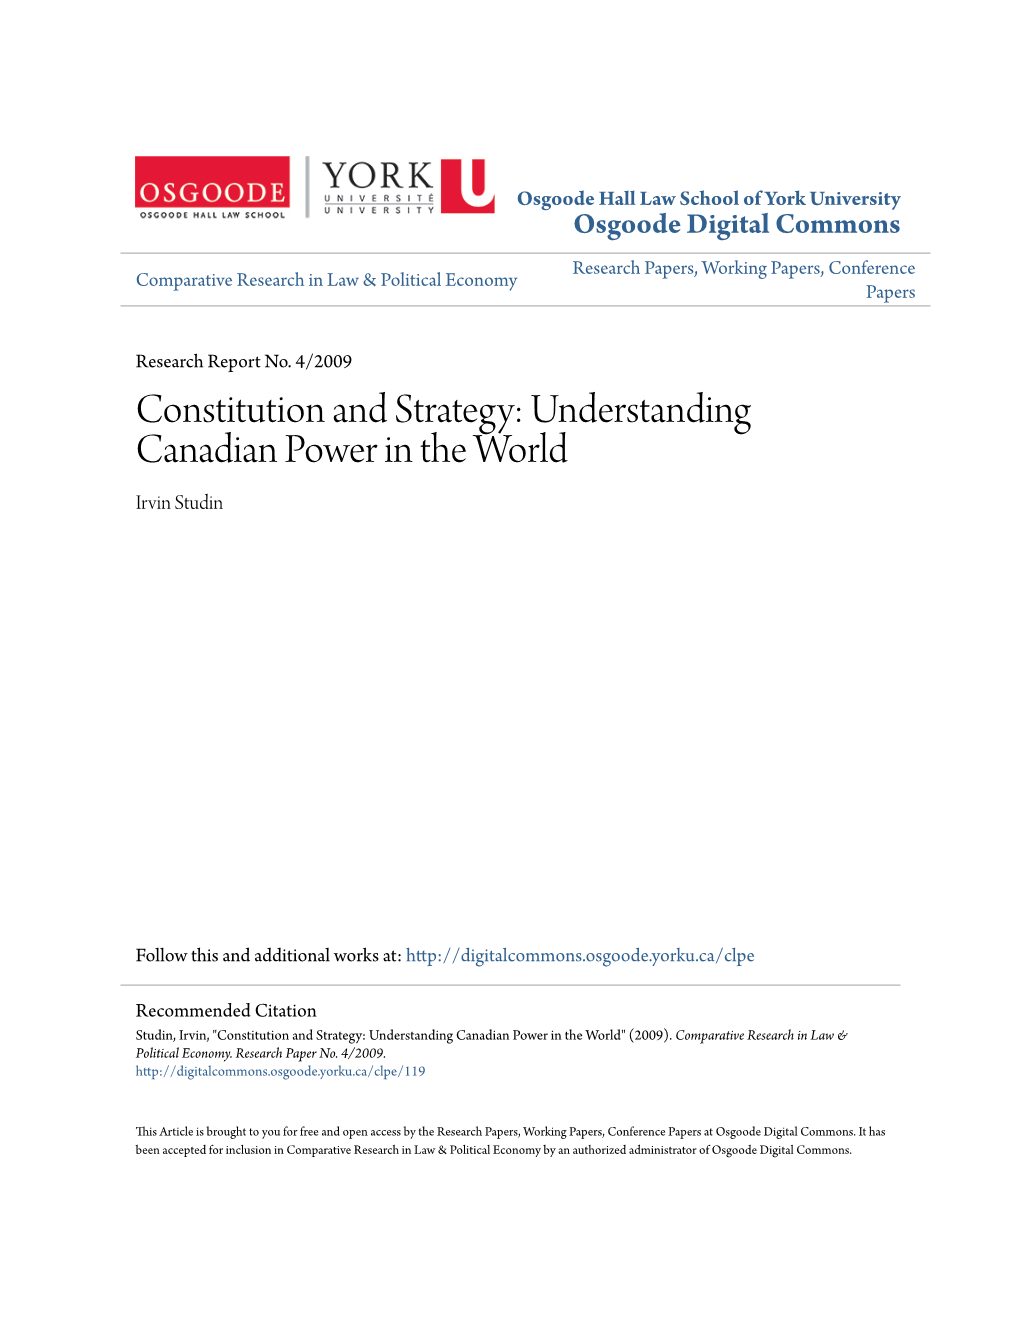 Constitution and Strategy: Understanding Canadian Power in the World Irvin Studin